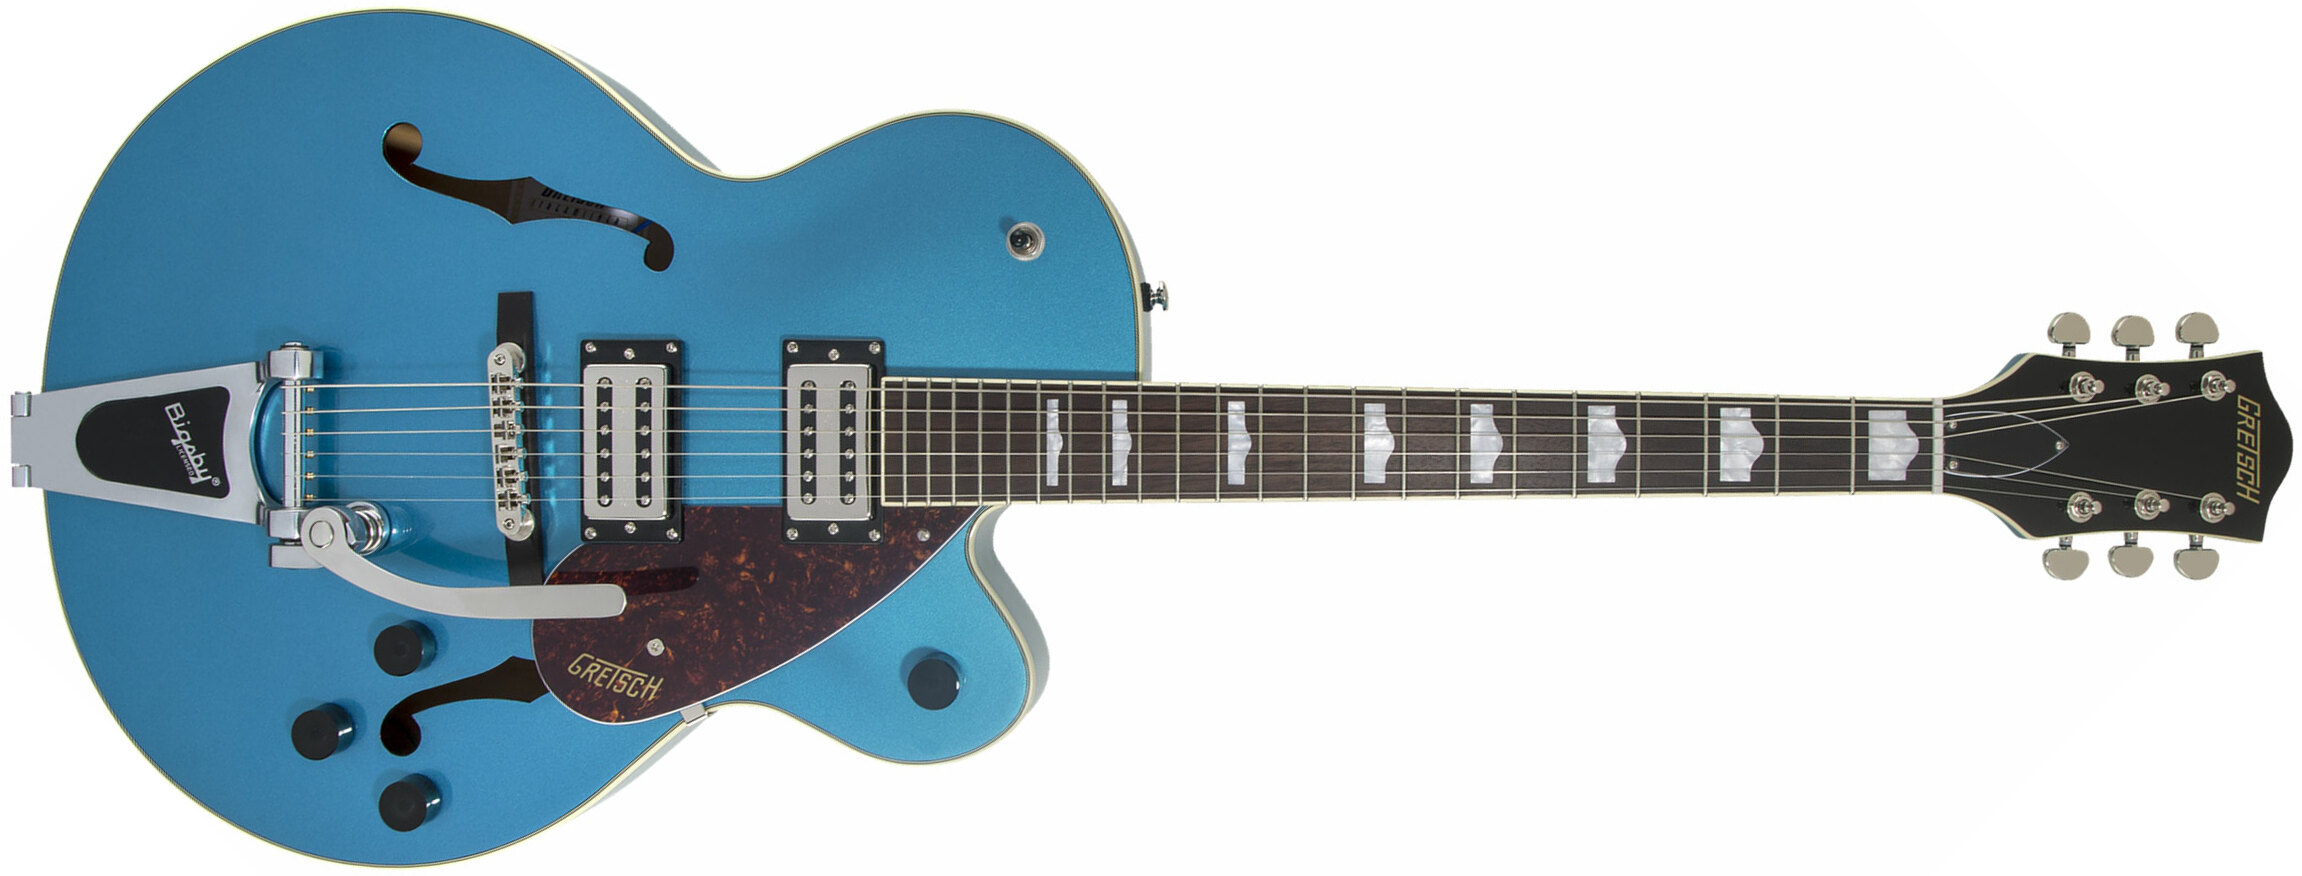 Gretsch G2420t Streamliner Hollow Body Bigsby Hh Trem Lau - Riviera Blue - Semi-hollow electric guitar - Main picture